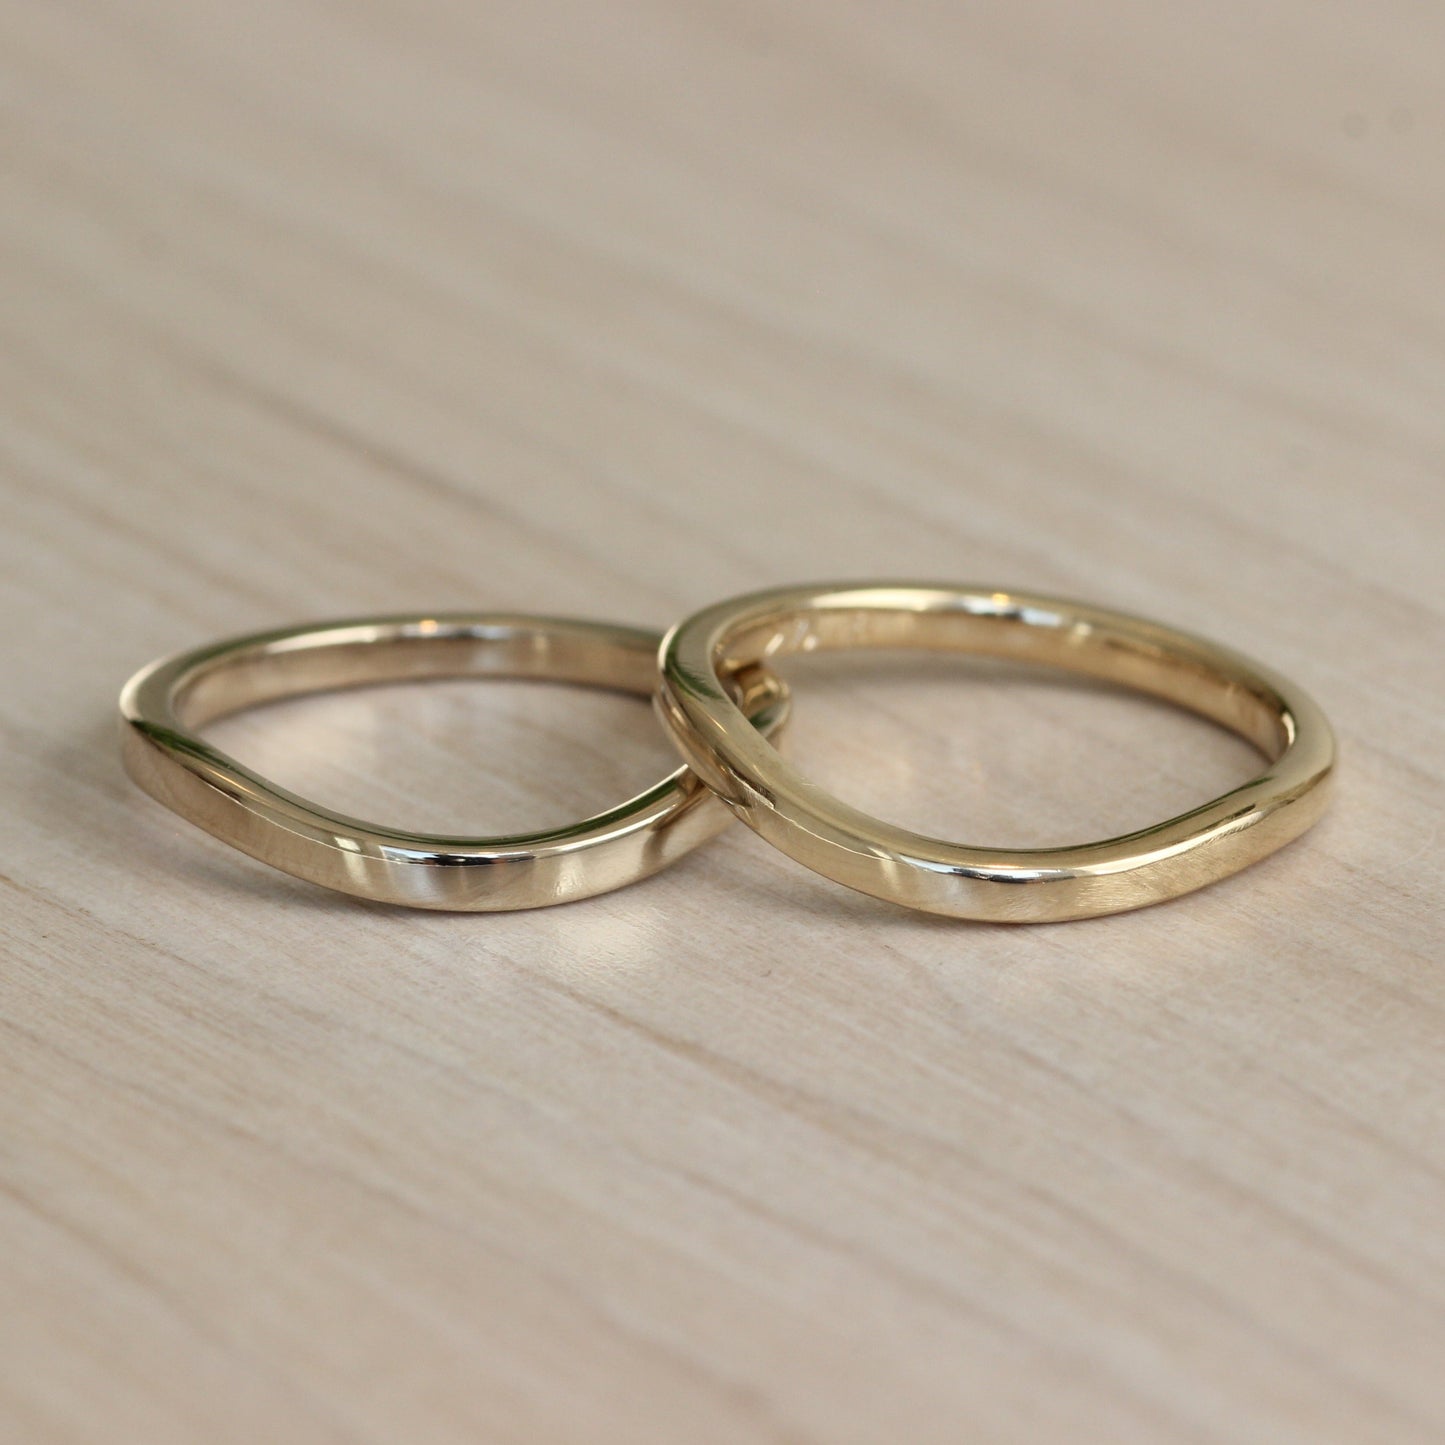 Group shot of Curve Flat Band / Soft + Yellow Gold and Curve Flat Band / Soft + White Gold